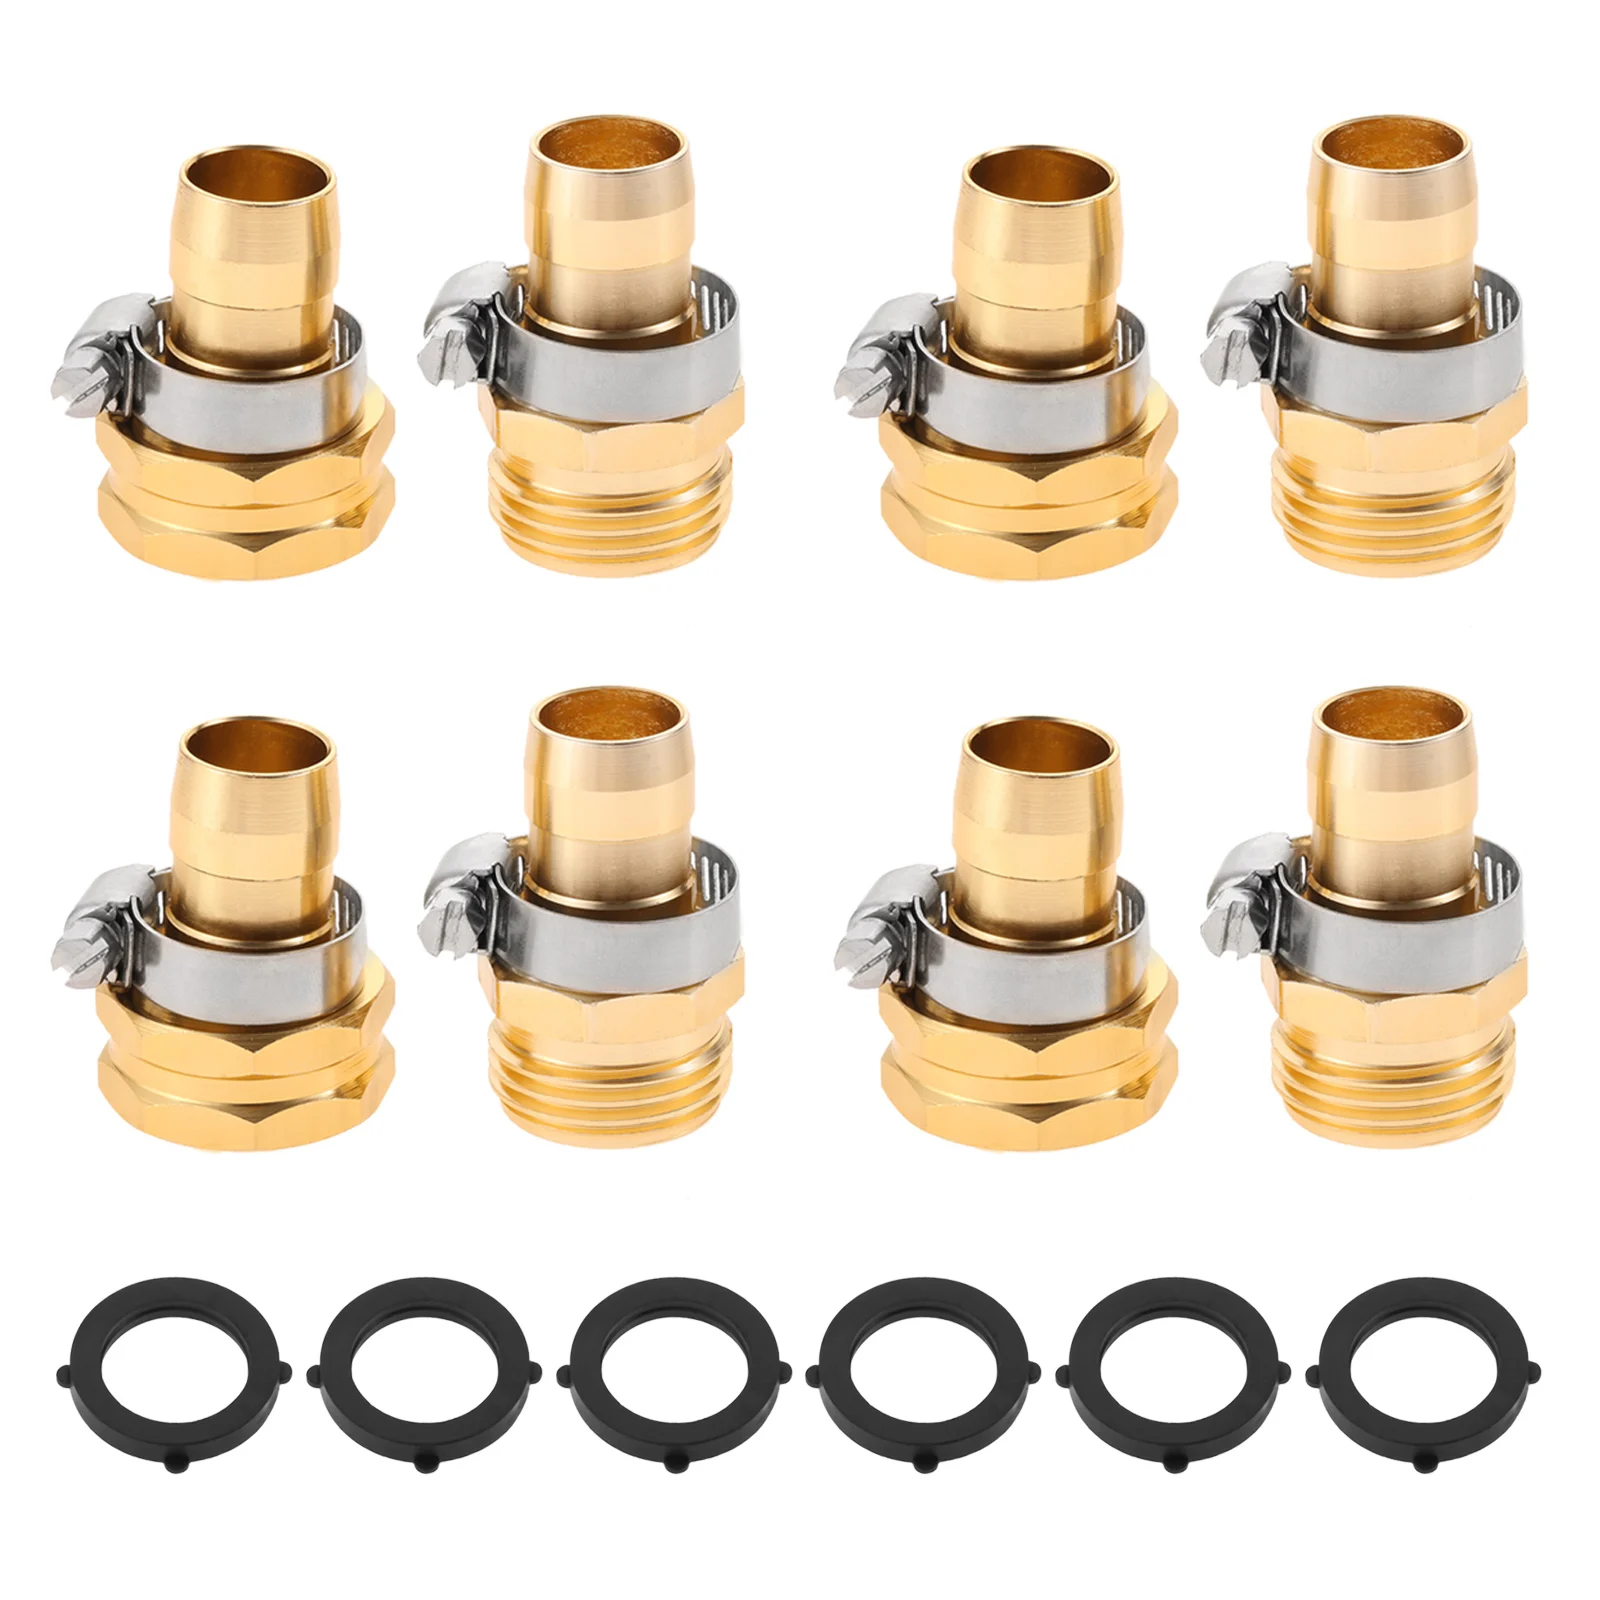 4 Sets Garden Hose Repair Connector with Clamps Aluminum Water Hose End Replacement Fit for 3/4" and 5/8" Garden Hose Fittings